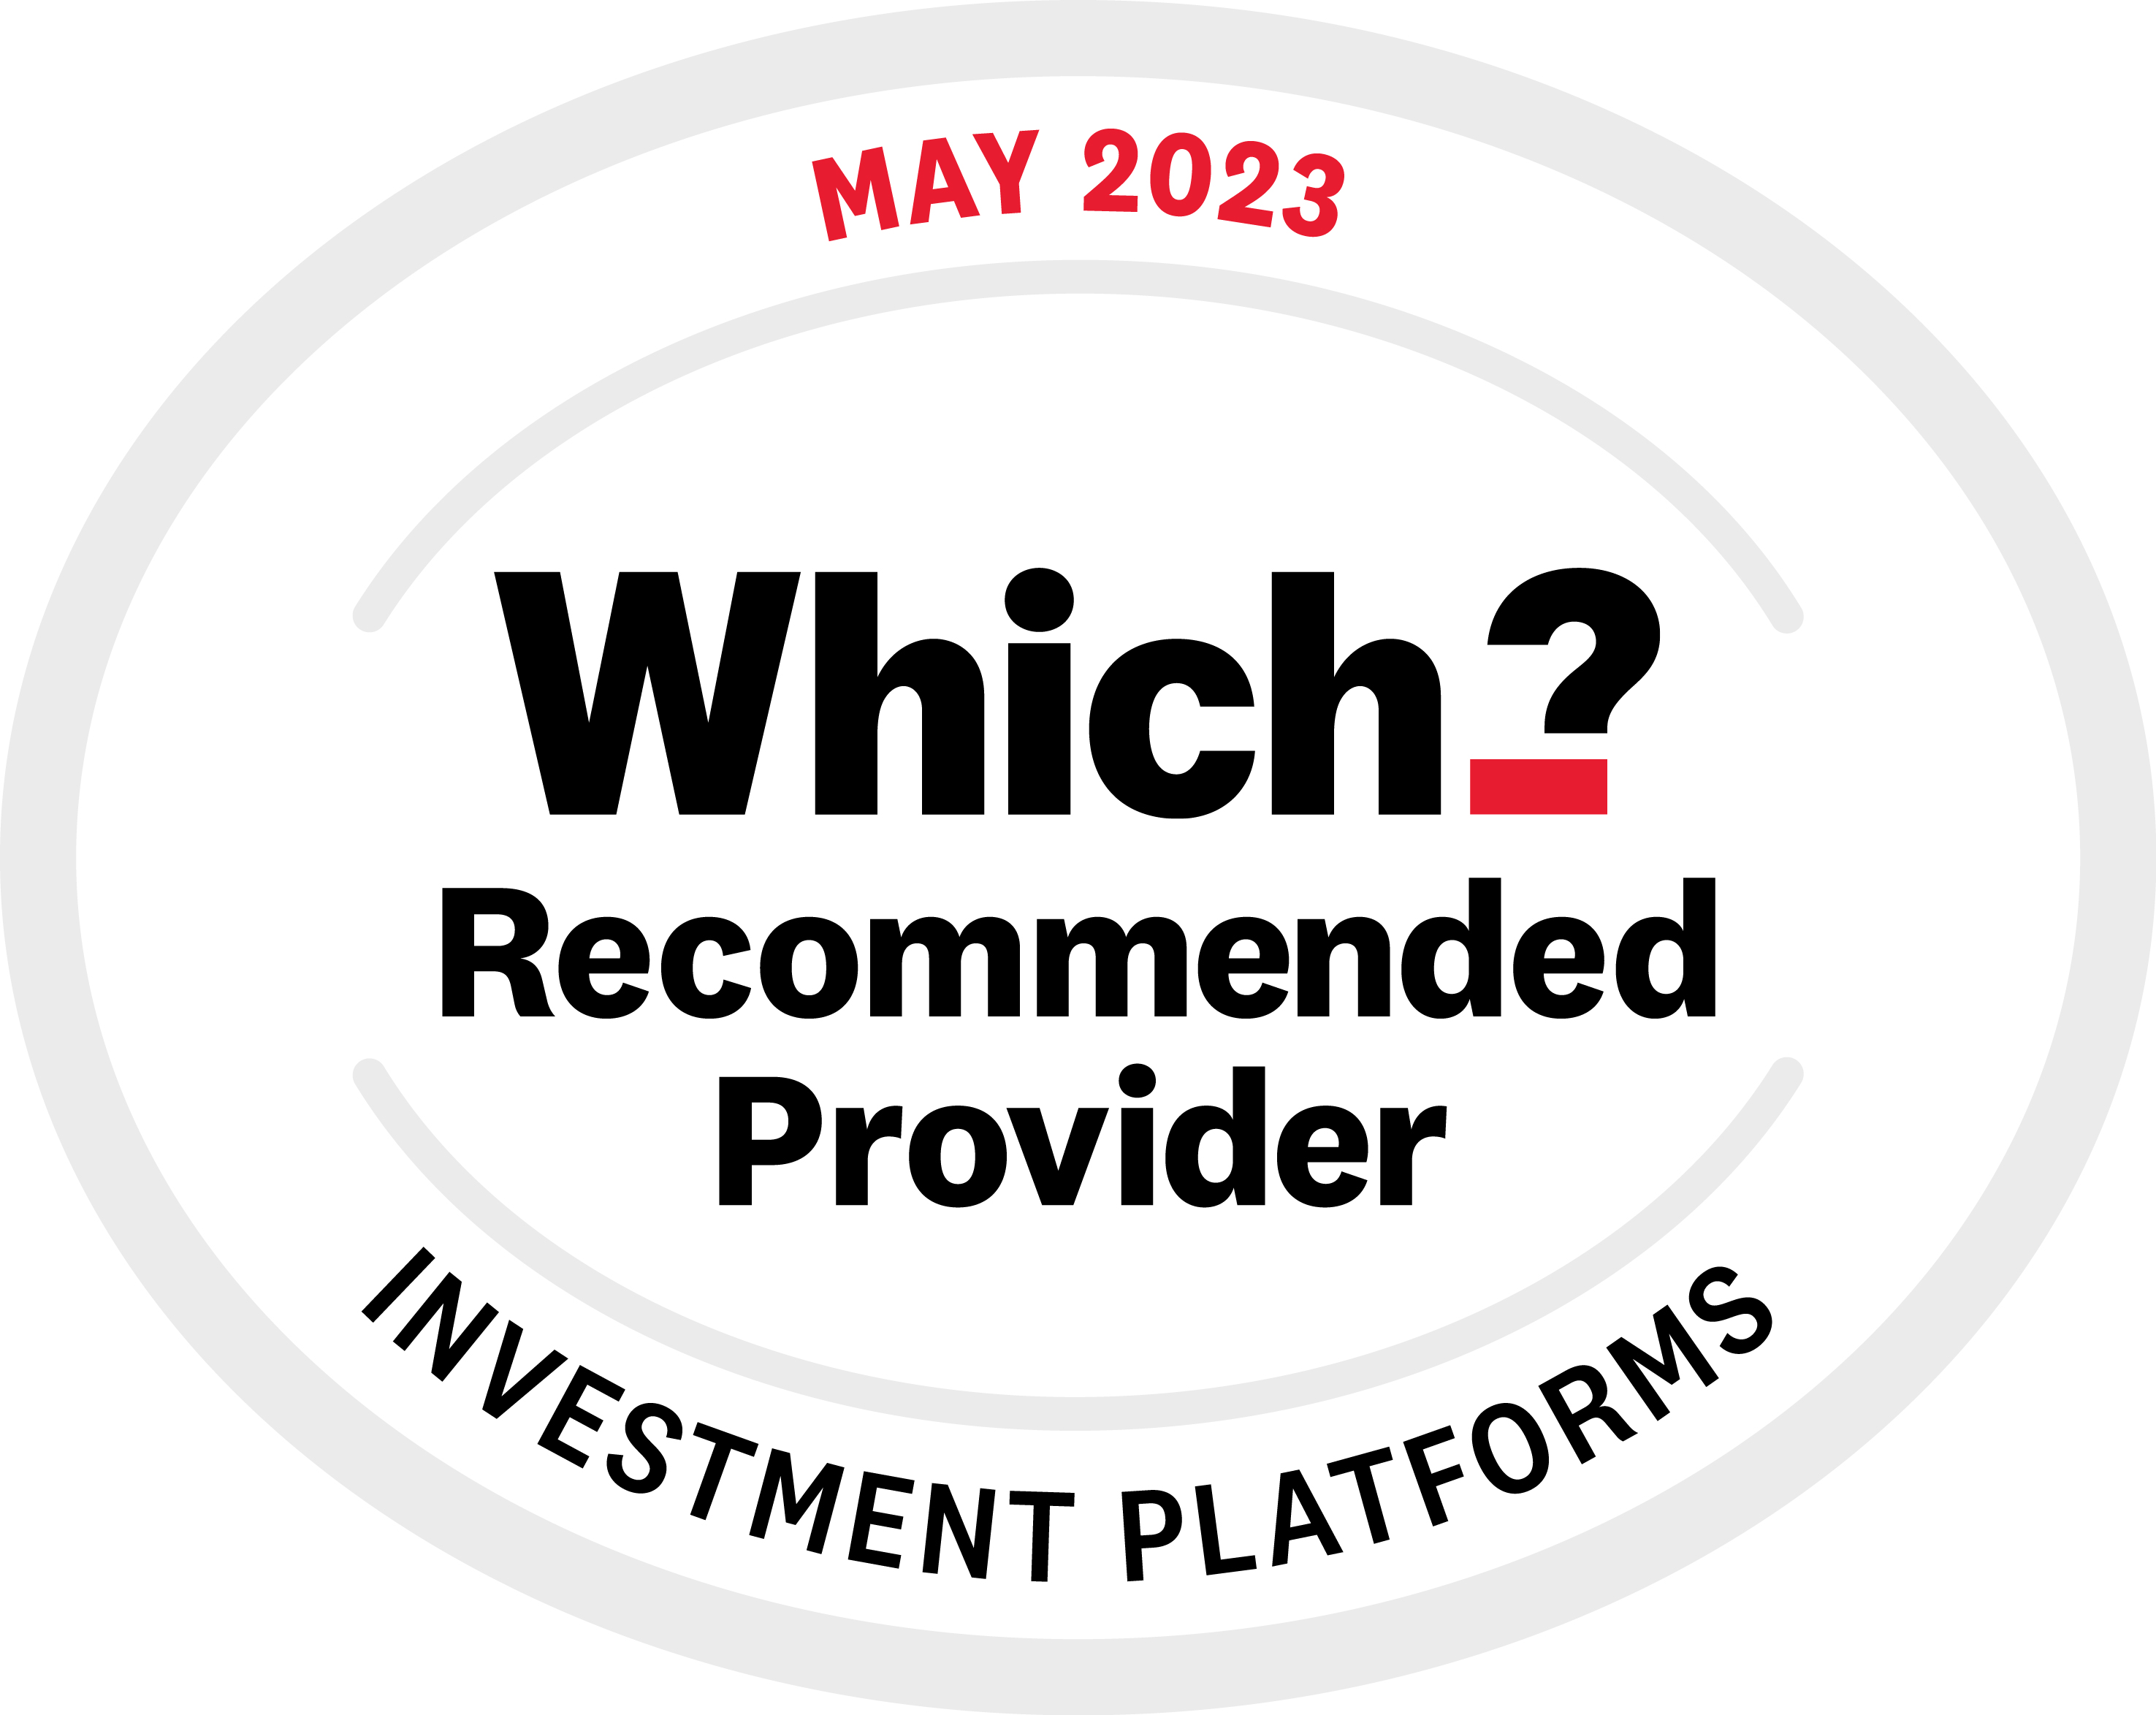 AJ Bell Which? recommended provider investments platform may 2023